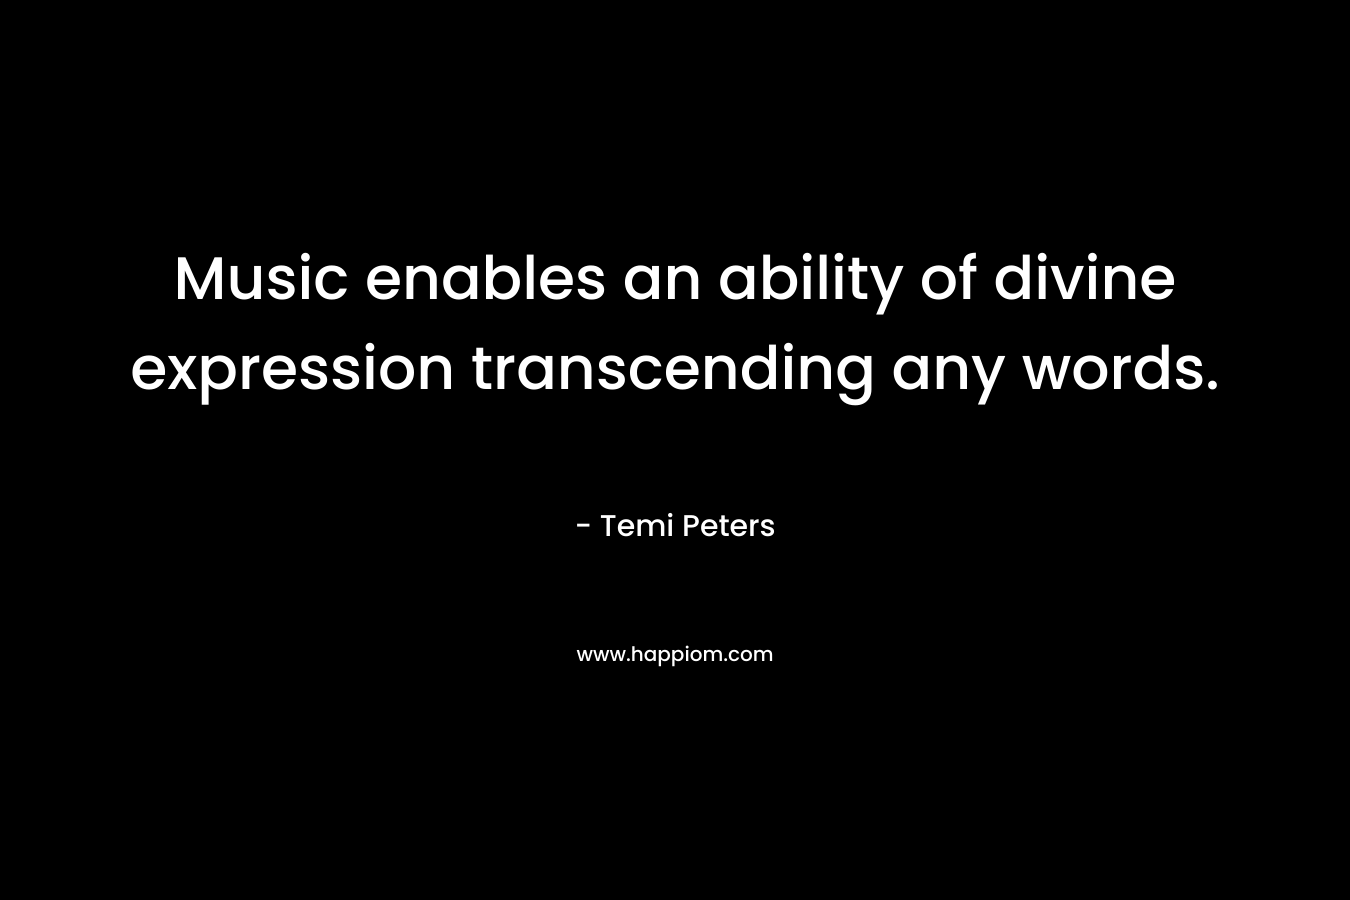 Music enables an ability of divine expression transcending any words. – Temi Peters